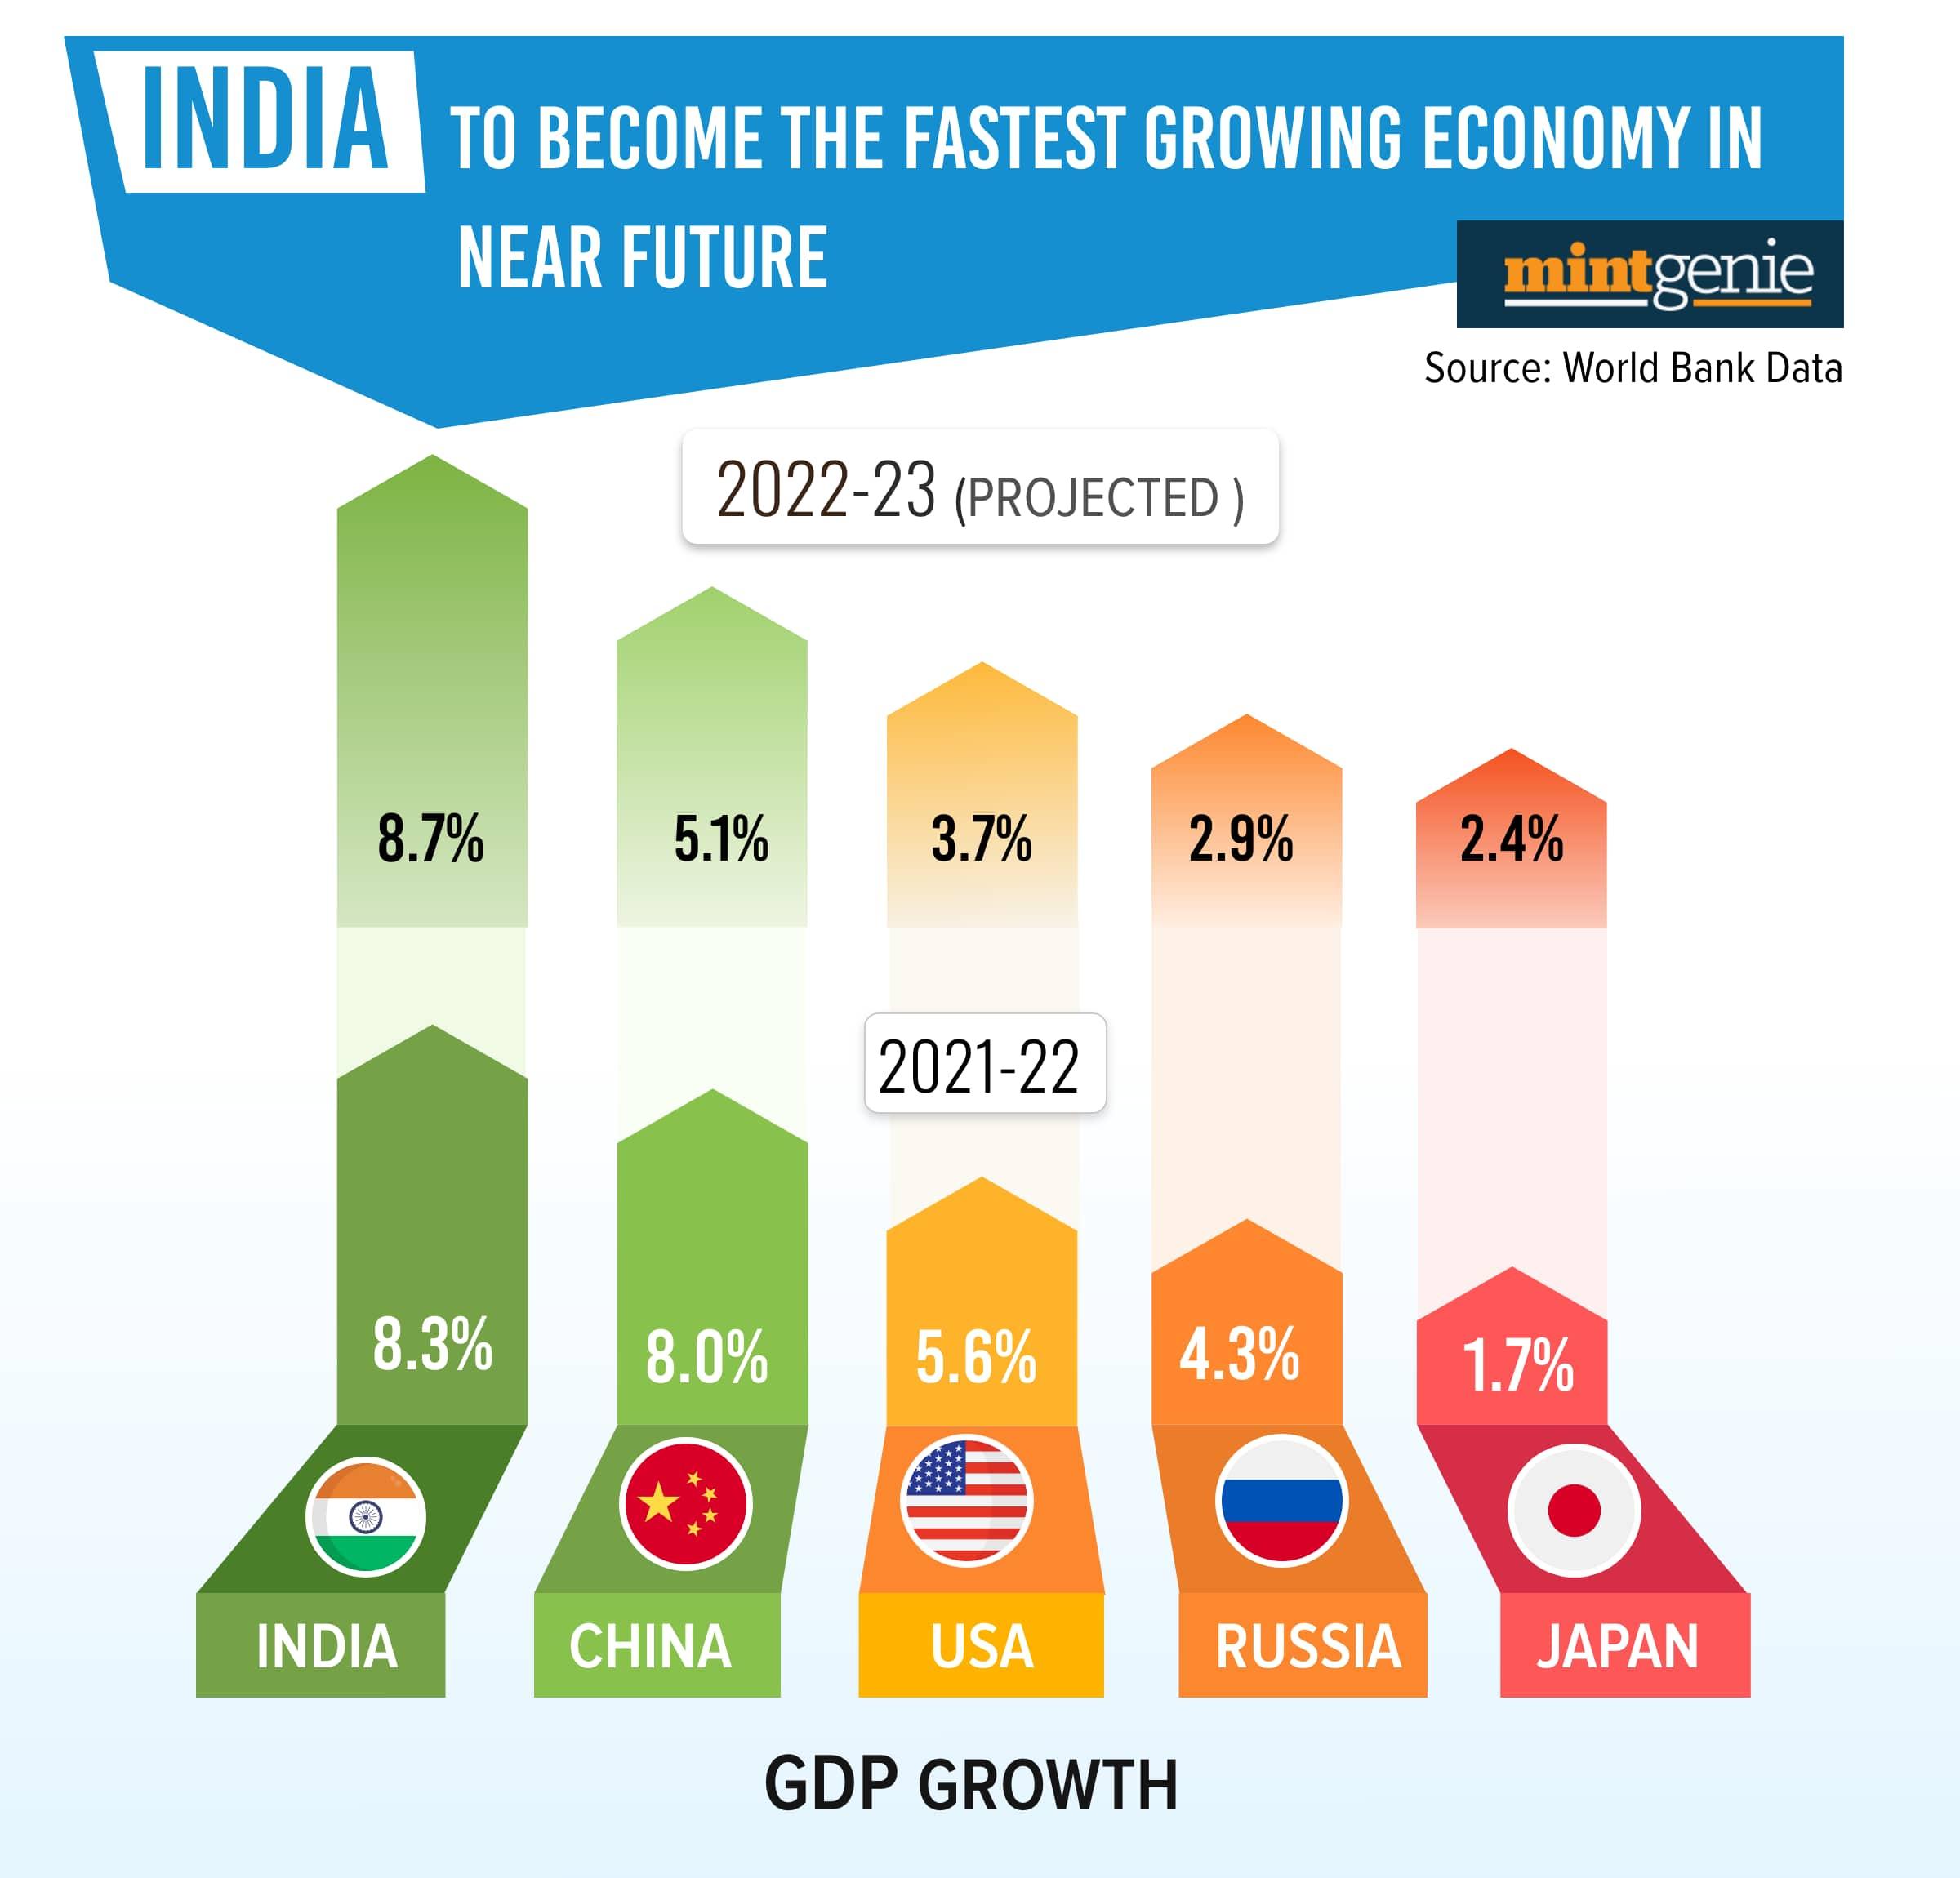 India to become the fastest growing economy in near future